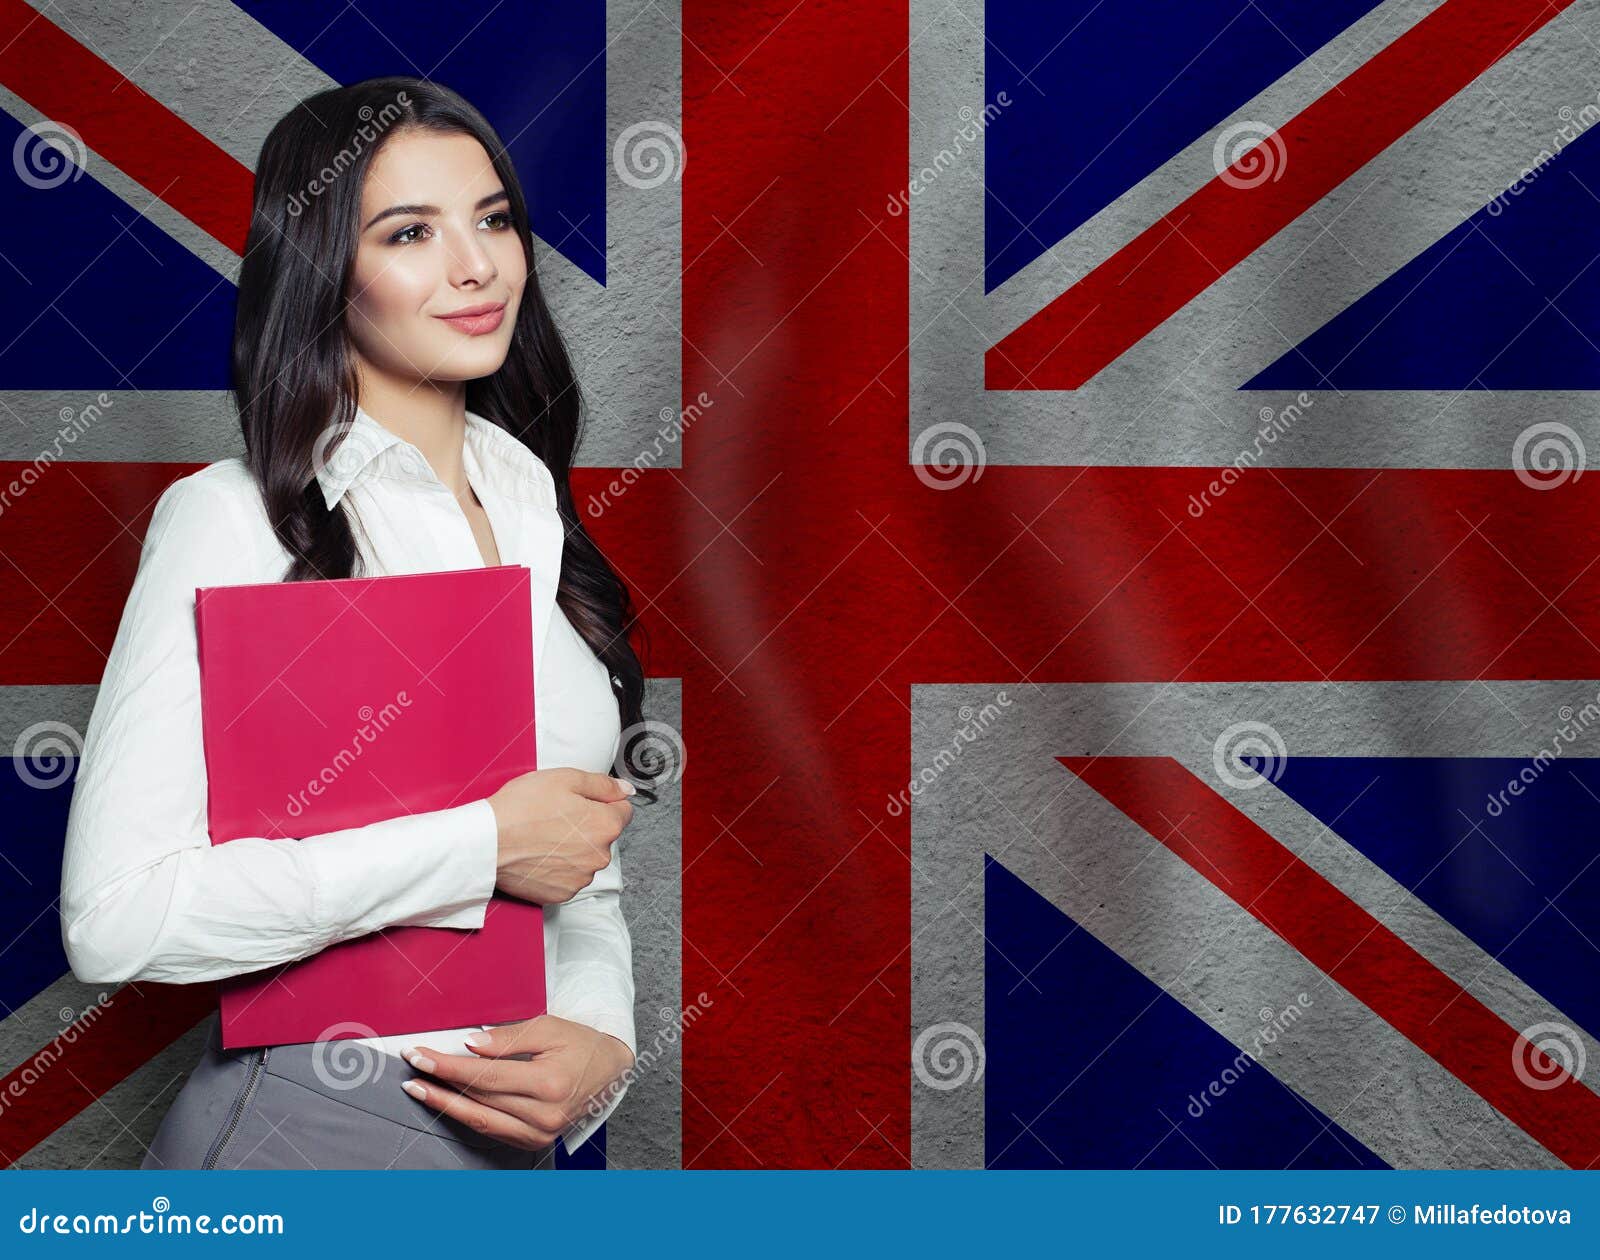 Optimistic Woman with United Kingdom Flag. Distance Learning in Great ...